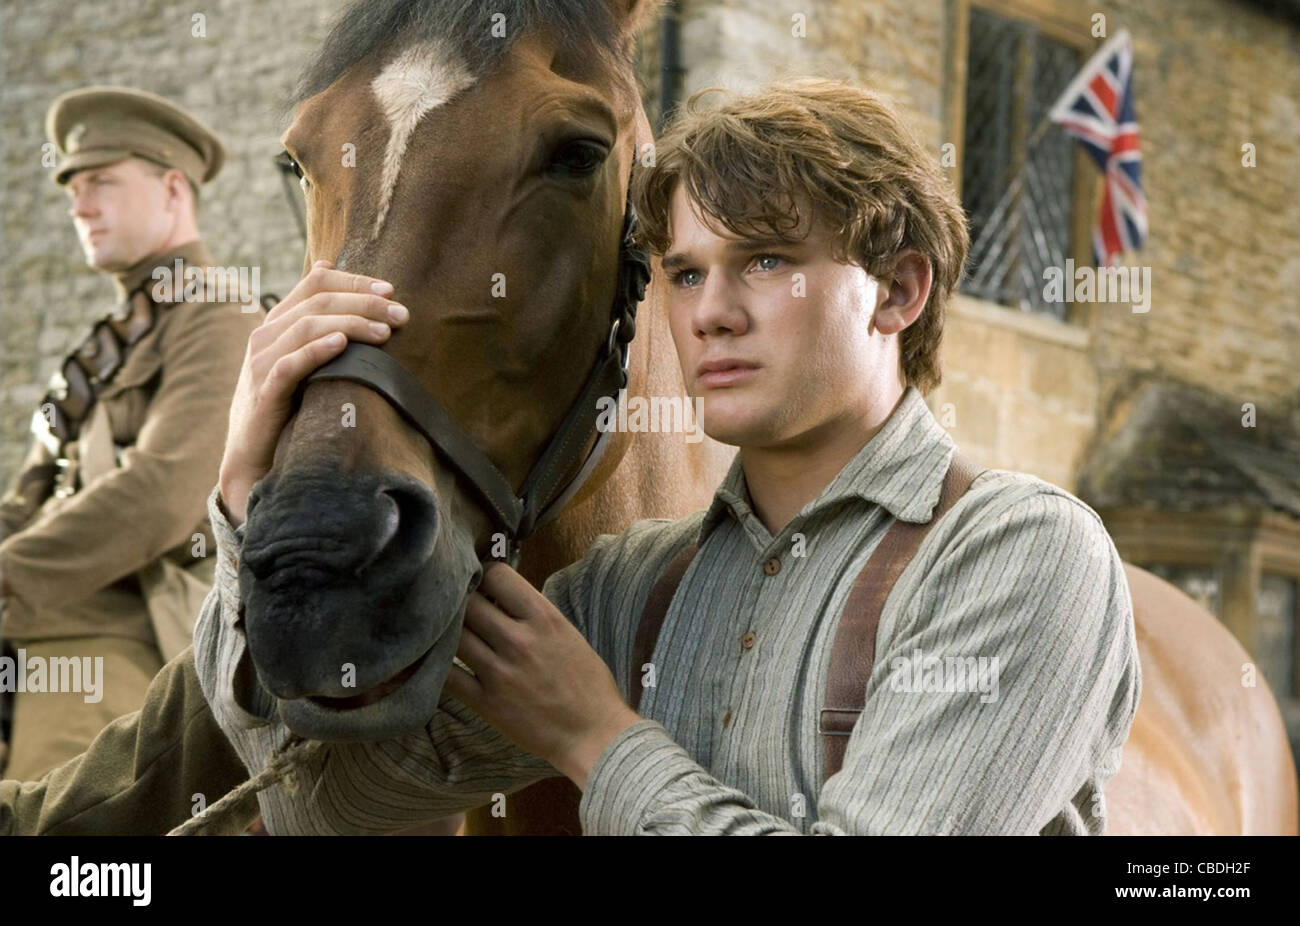 WAR HORSE  2011 DreamWorks film directed by Steven Spielberg with Jeremy Irvine. Photo Andrew Cooper Stock Photo